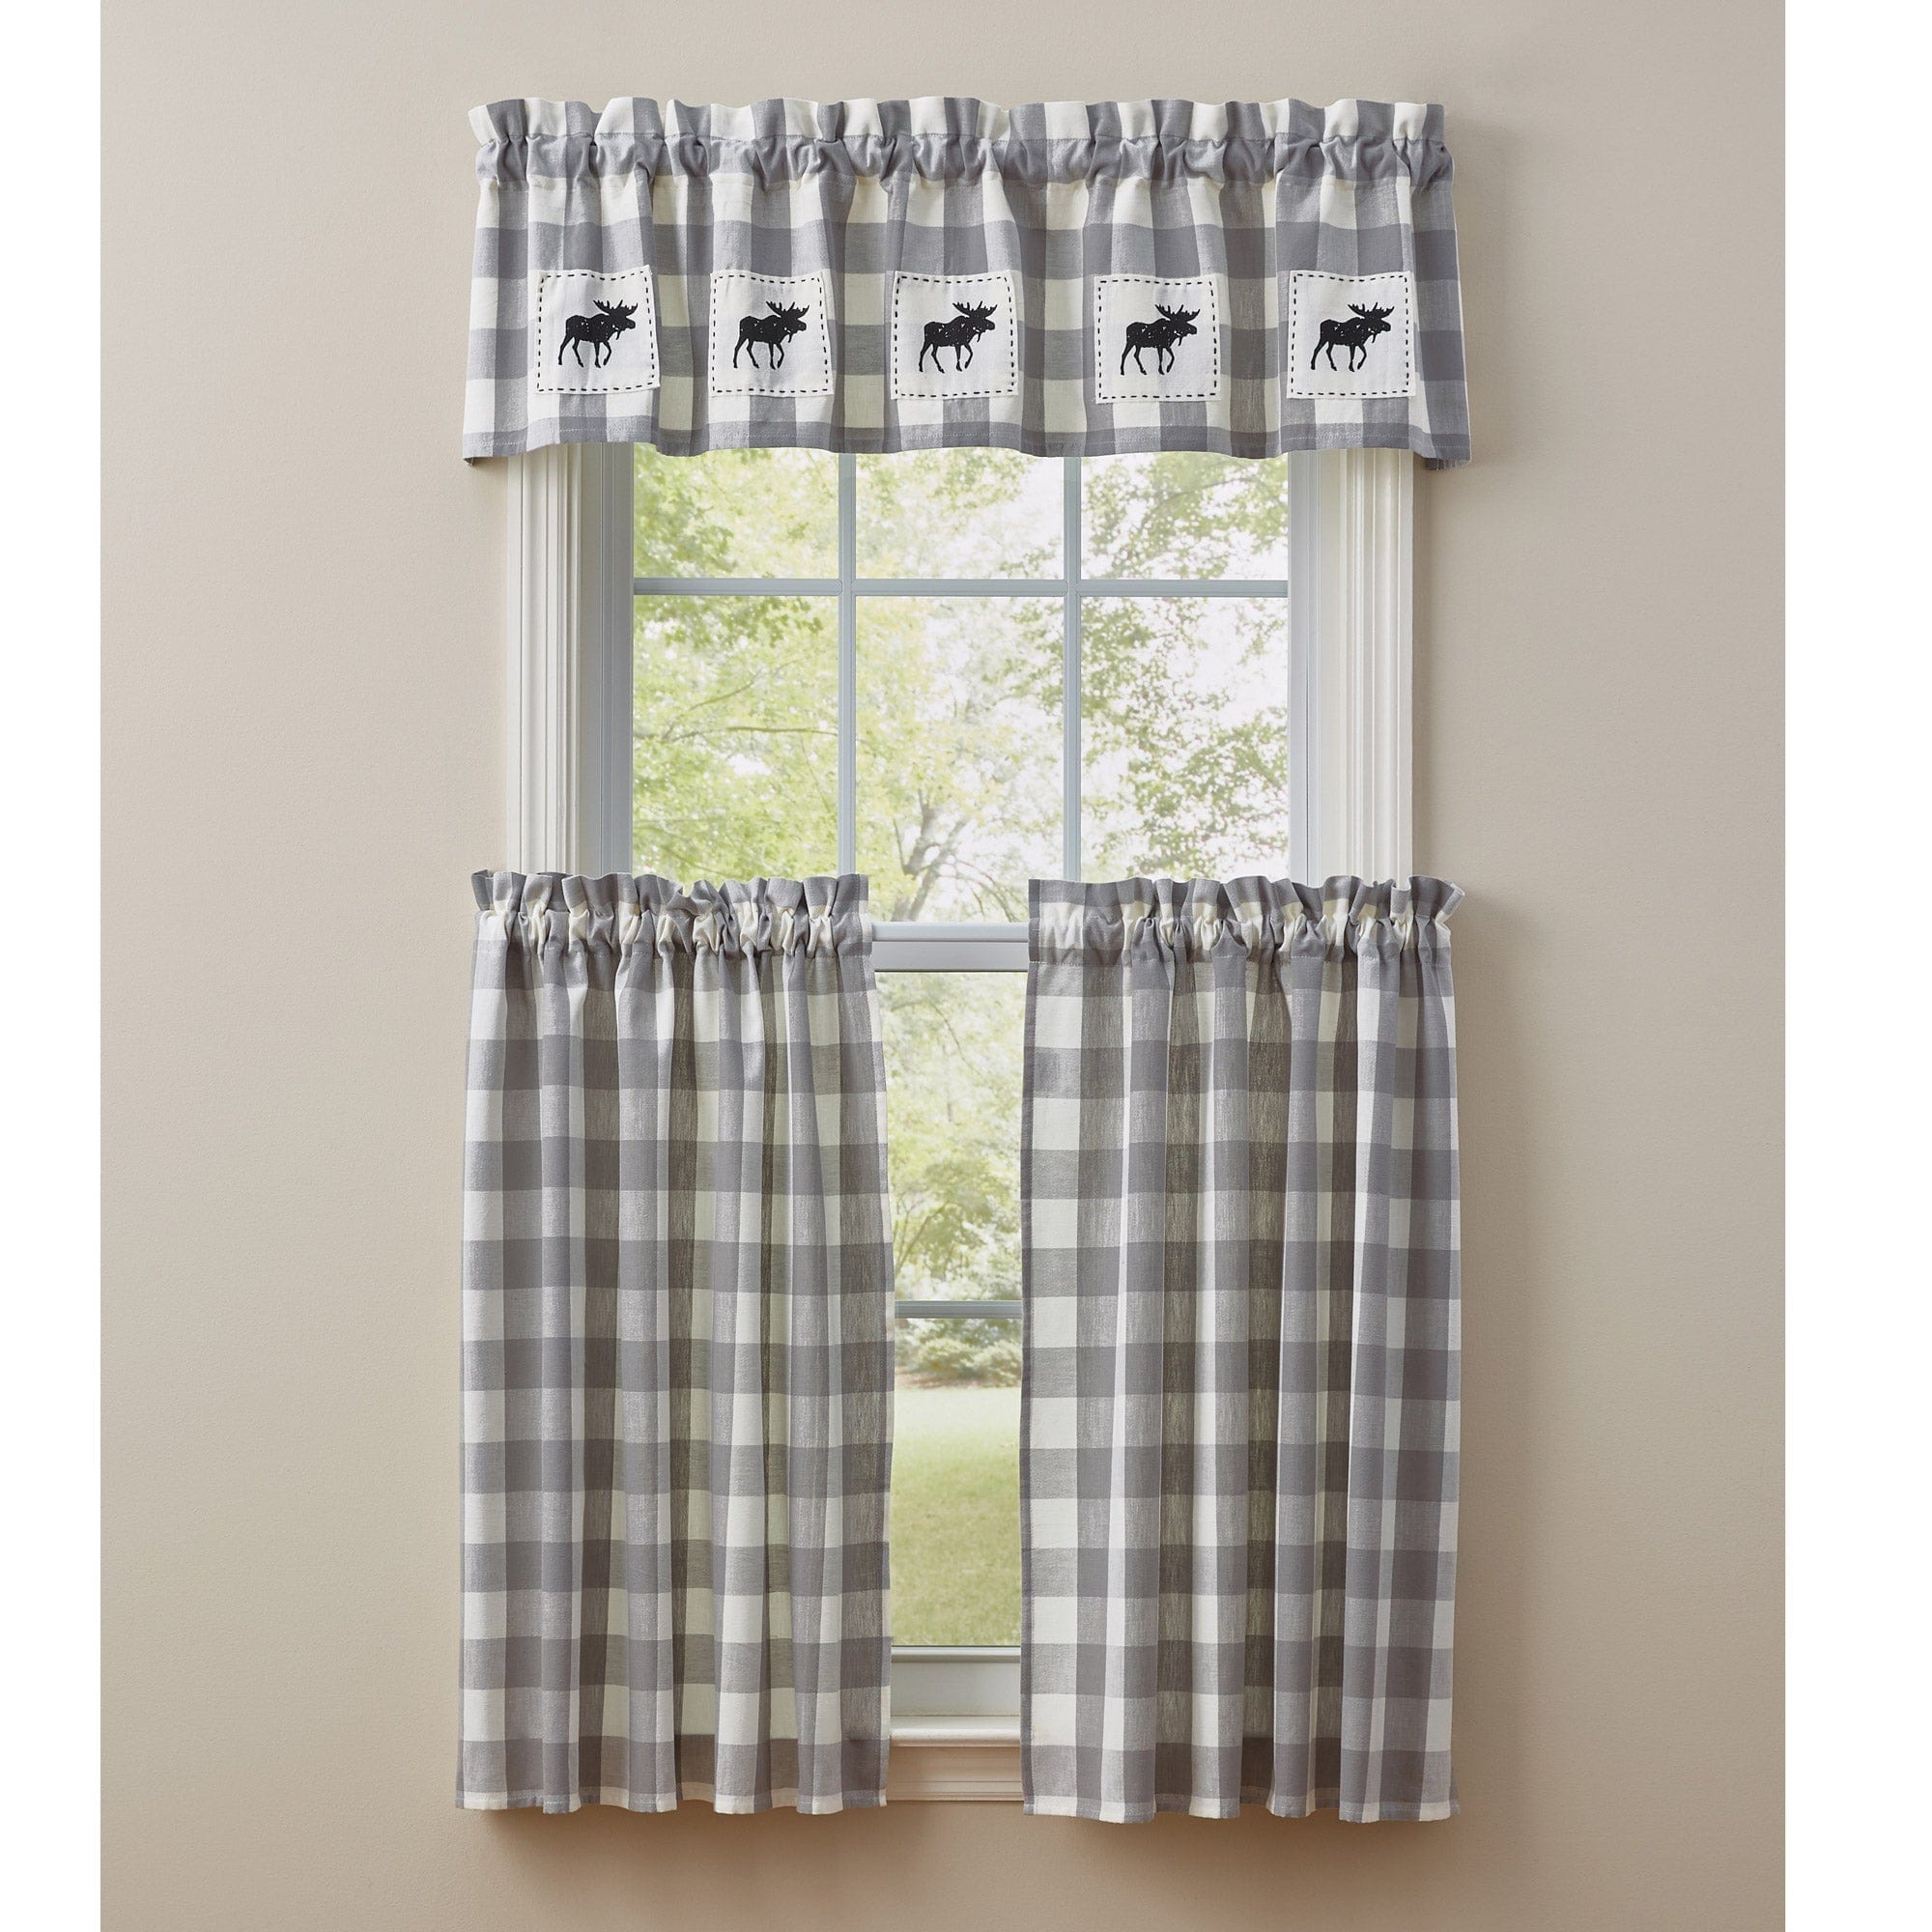 Wicklow Moose Patch Valance Lined-Park Designs-The Village Merchant